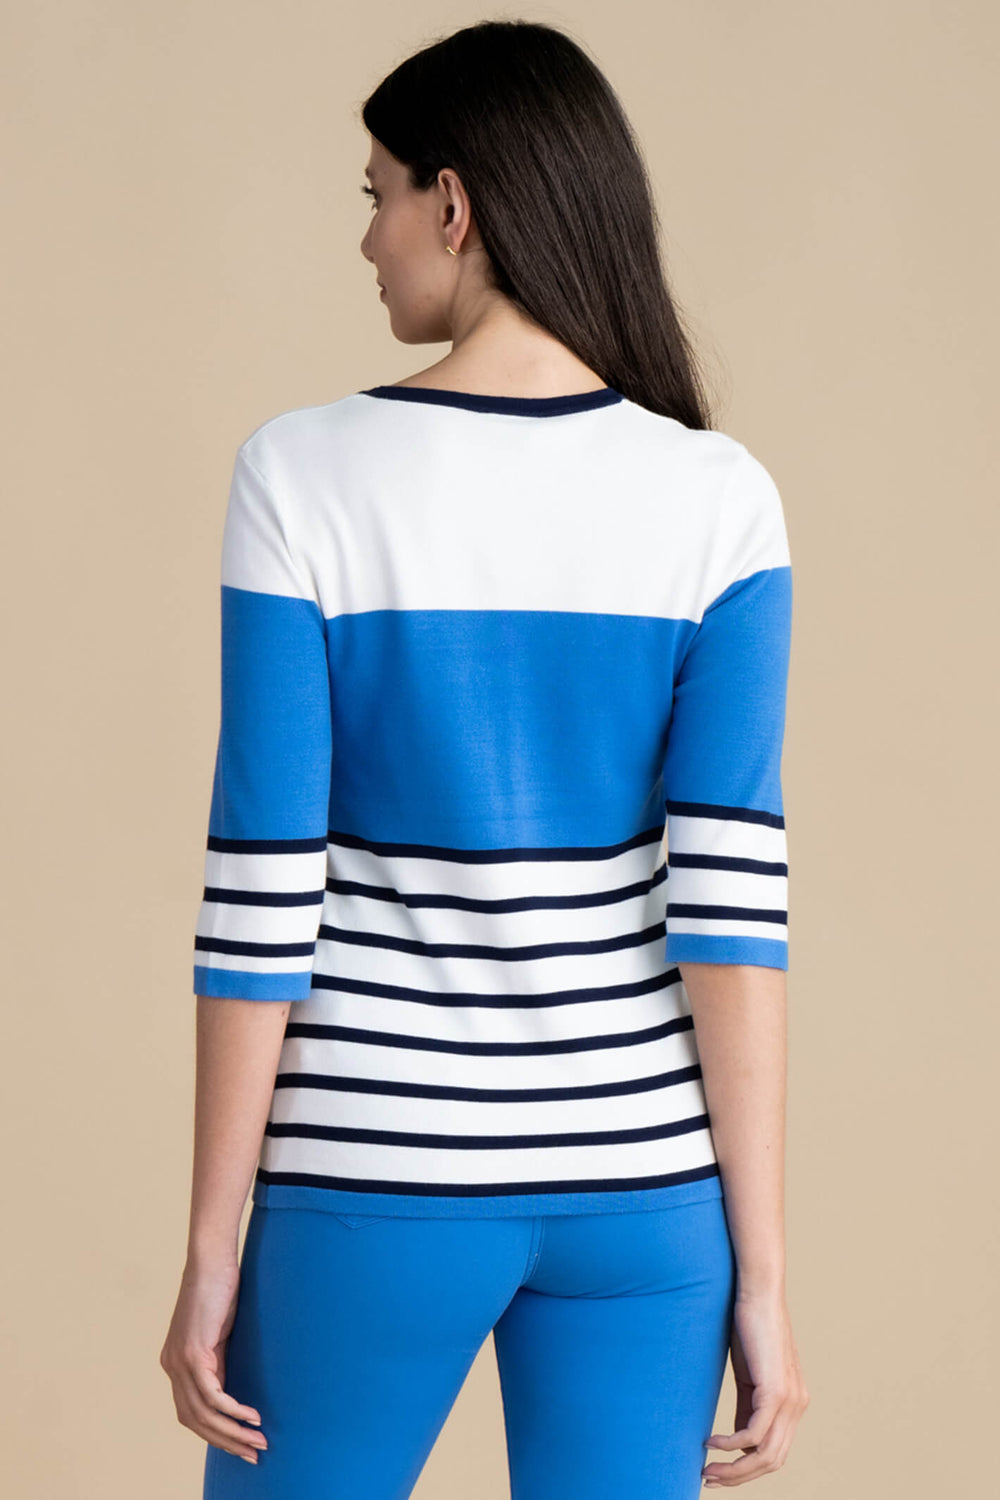 Marble Fashions 6883 201 Blue Strip Top - Experience Boutique